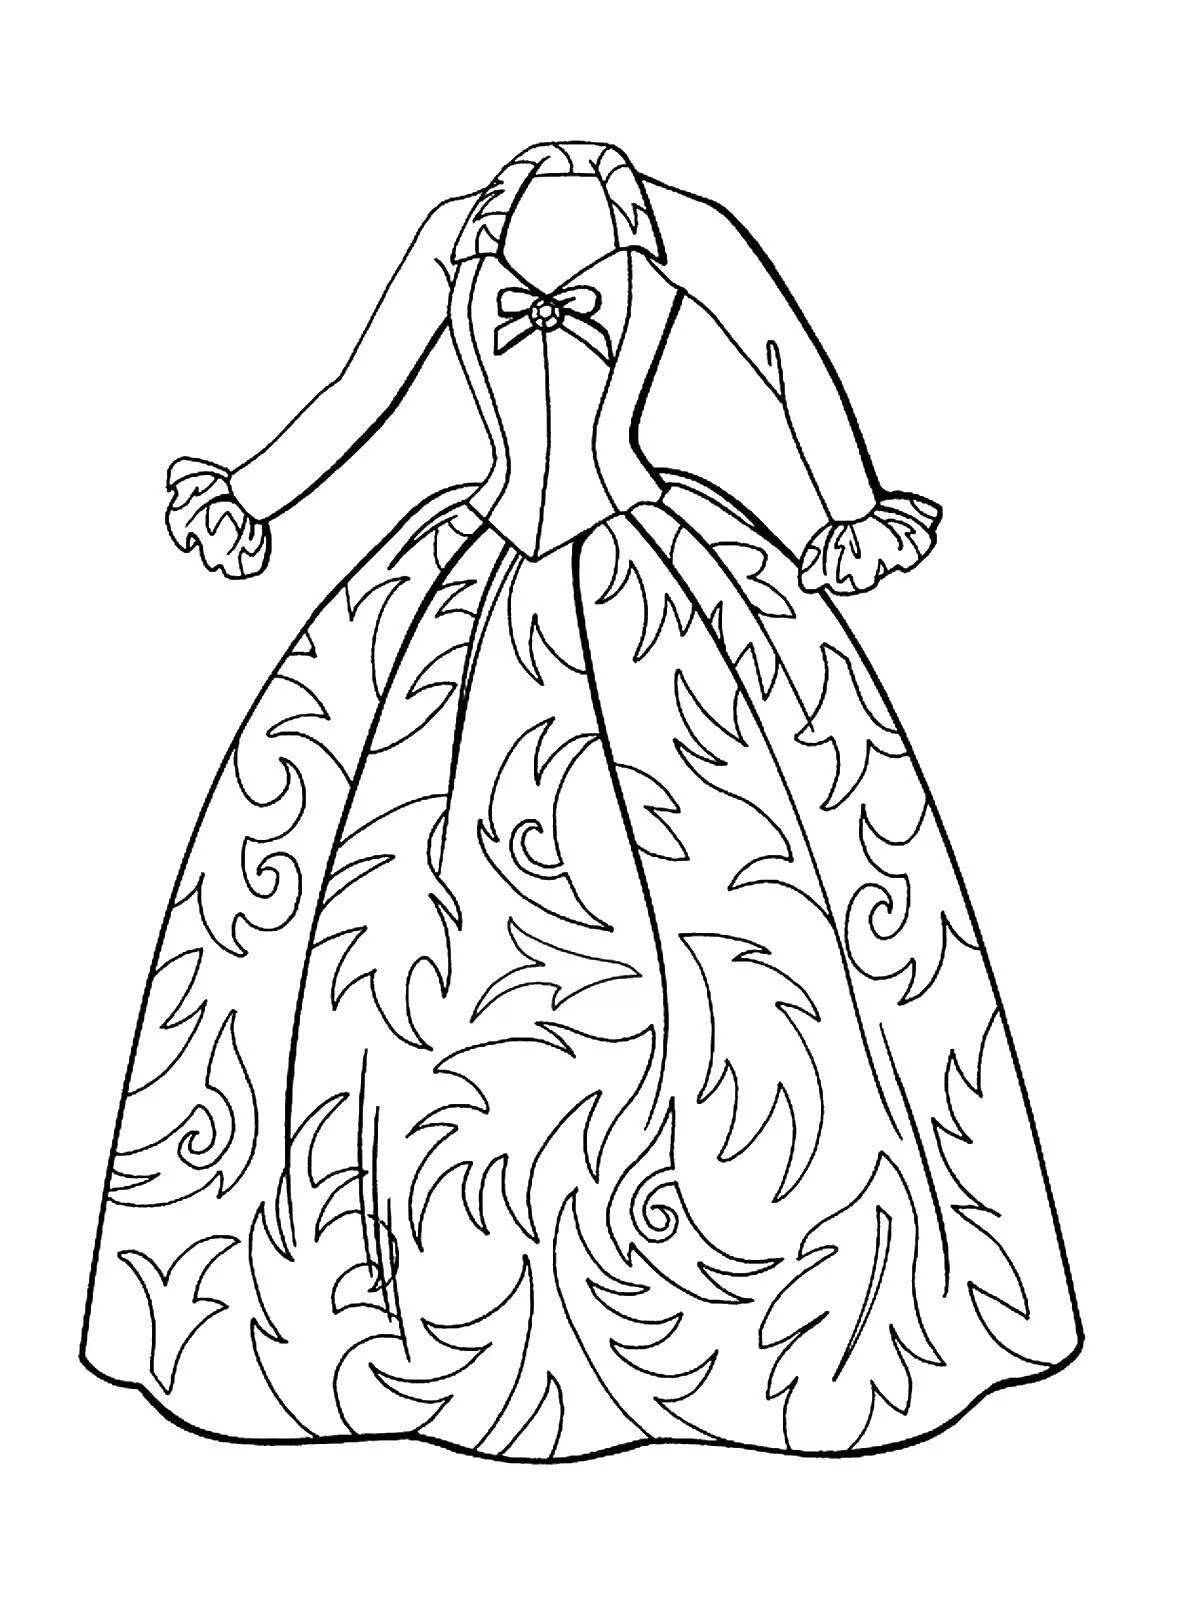 Coloring page of playful dress with clothes